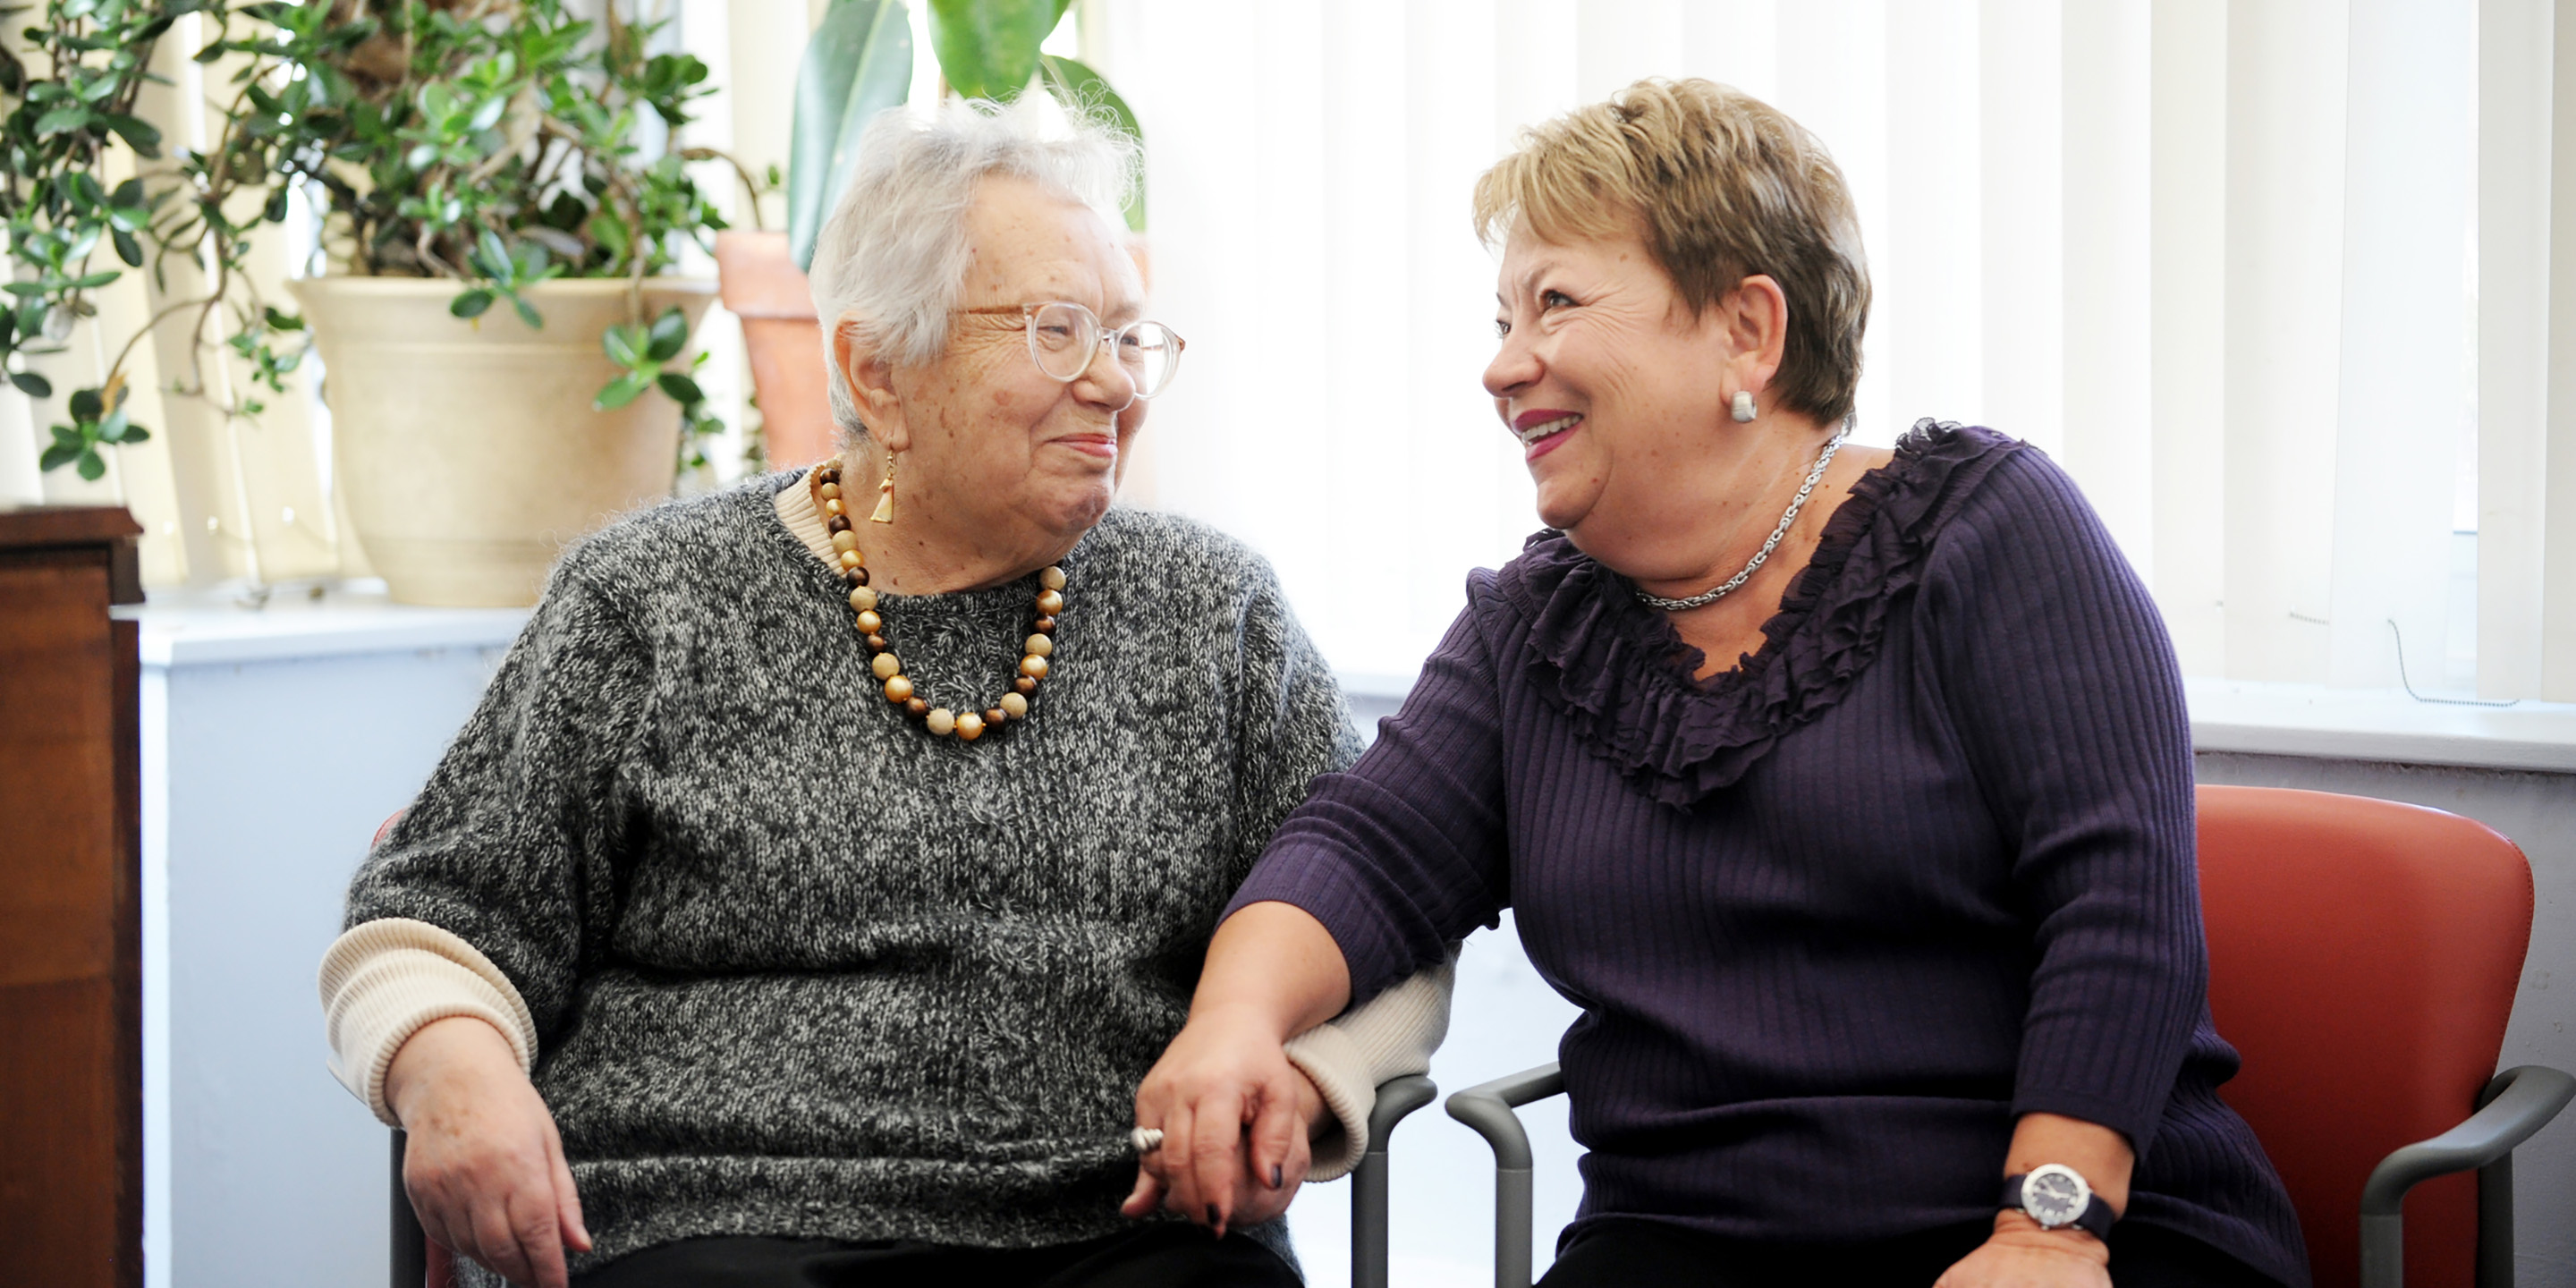 Two women sitting in chairs holding hands, smiling and talking to each other.